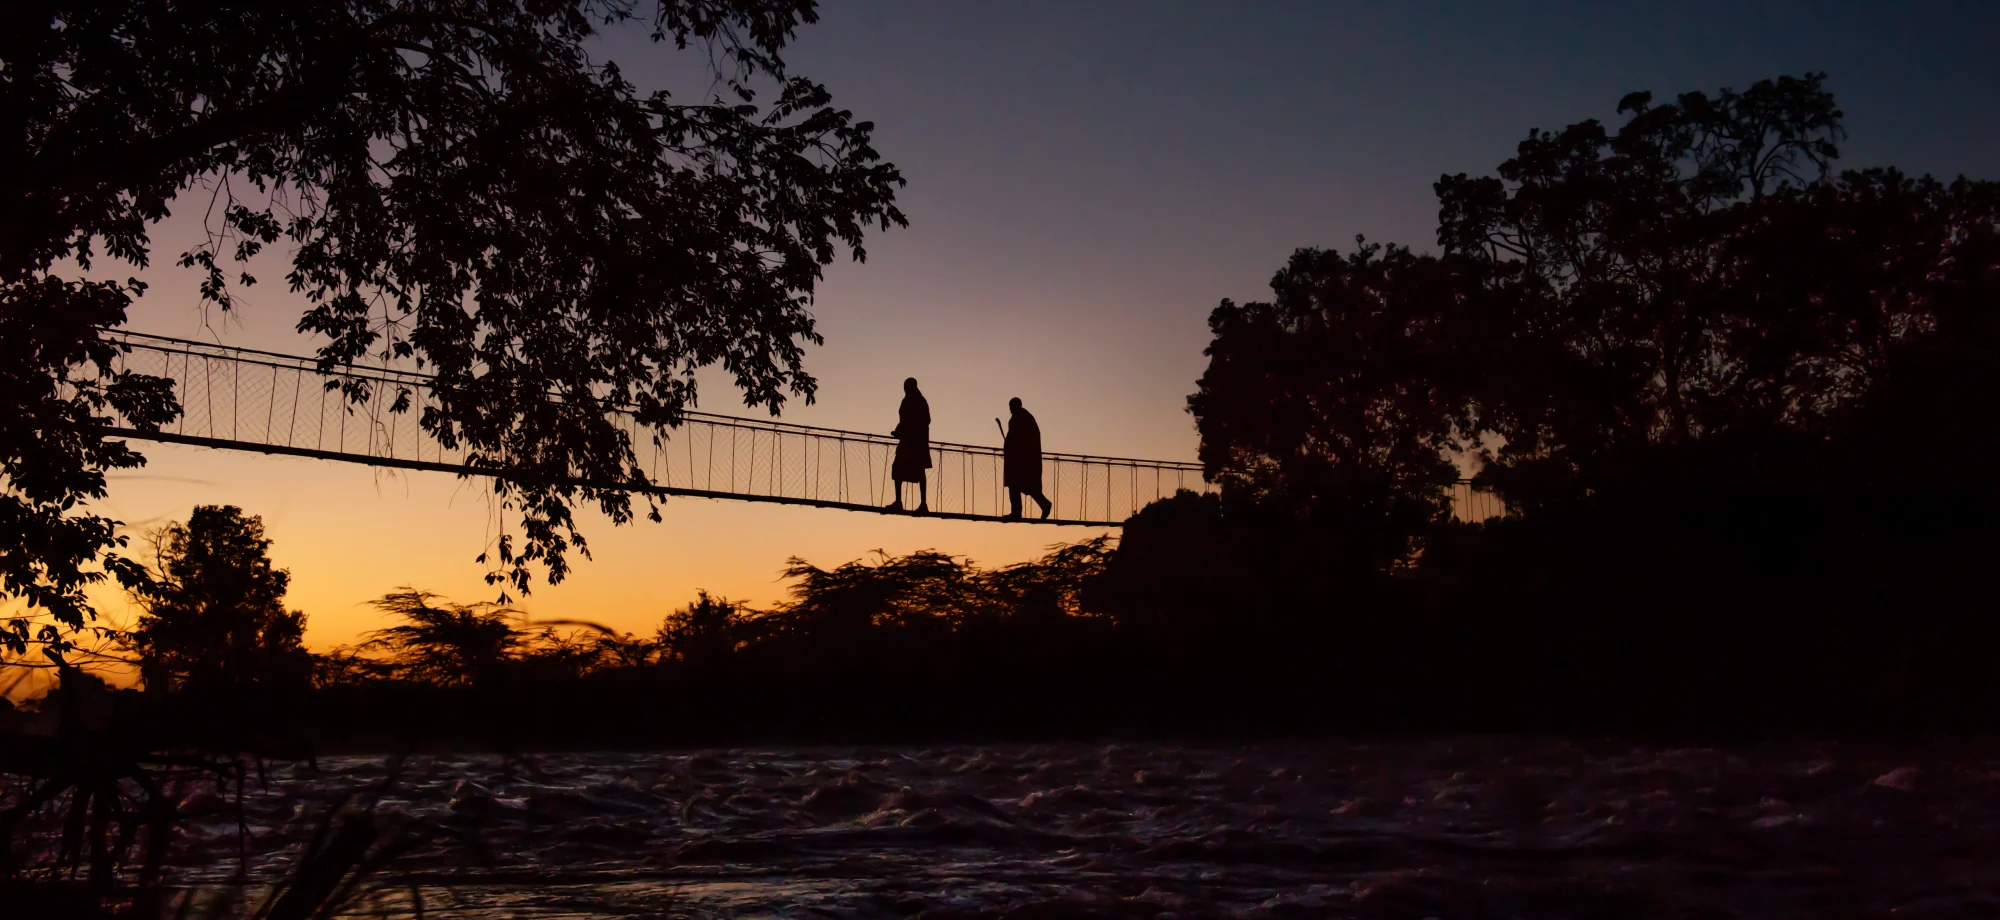 Two tribal men walk across the Ngare bridge at sunset. It is a long rope bridge joined by foliage at either side.